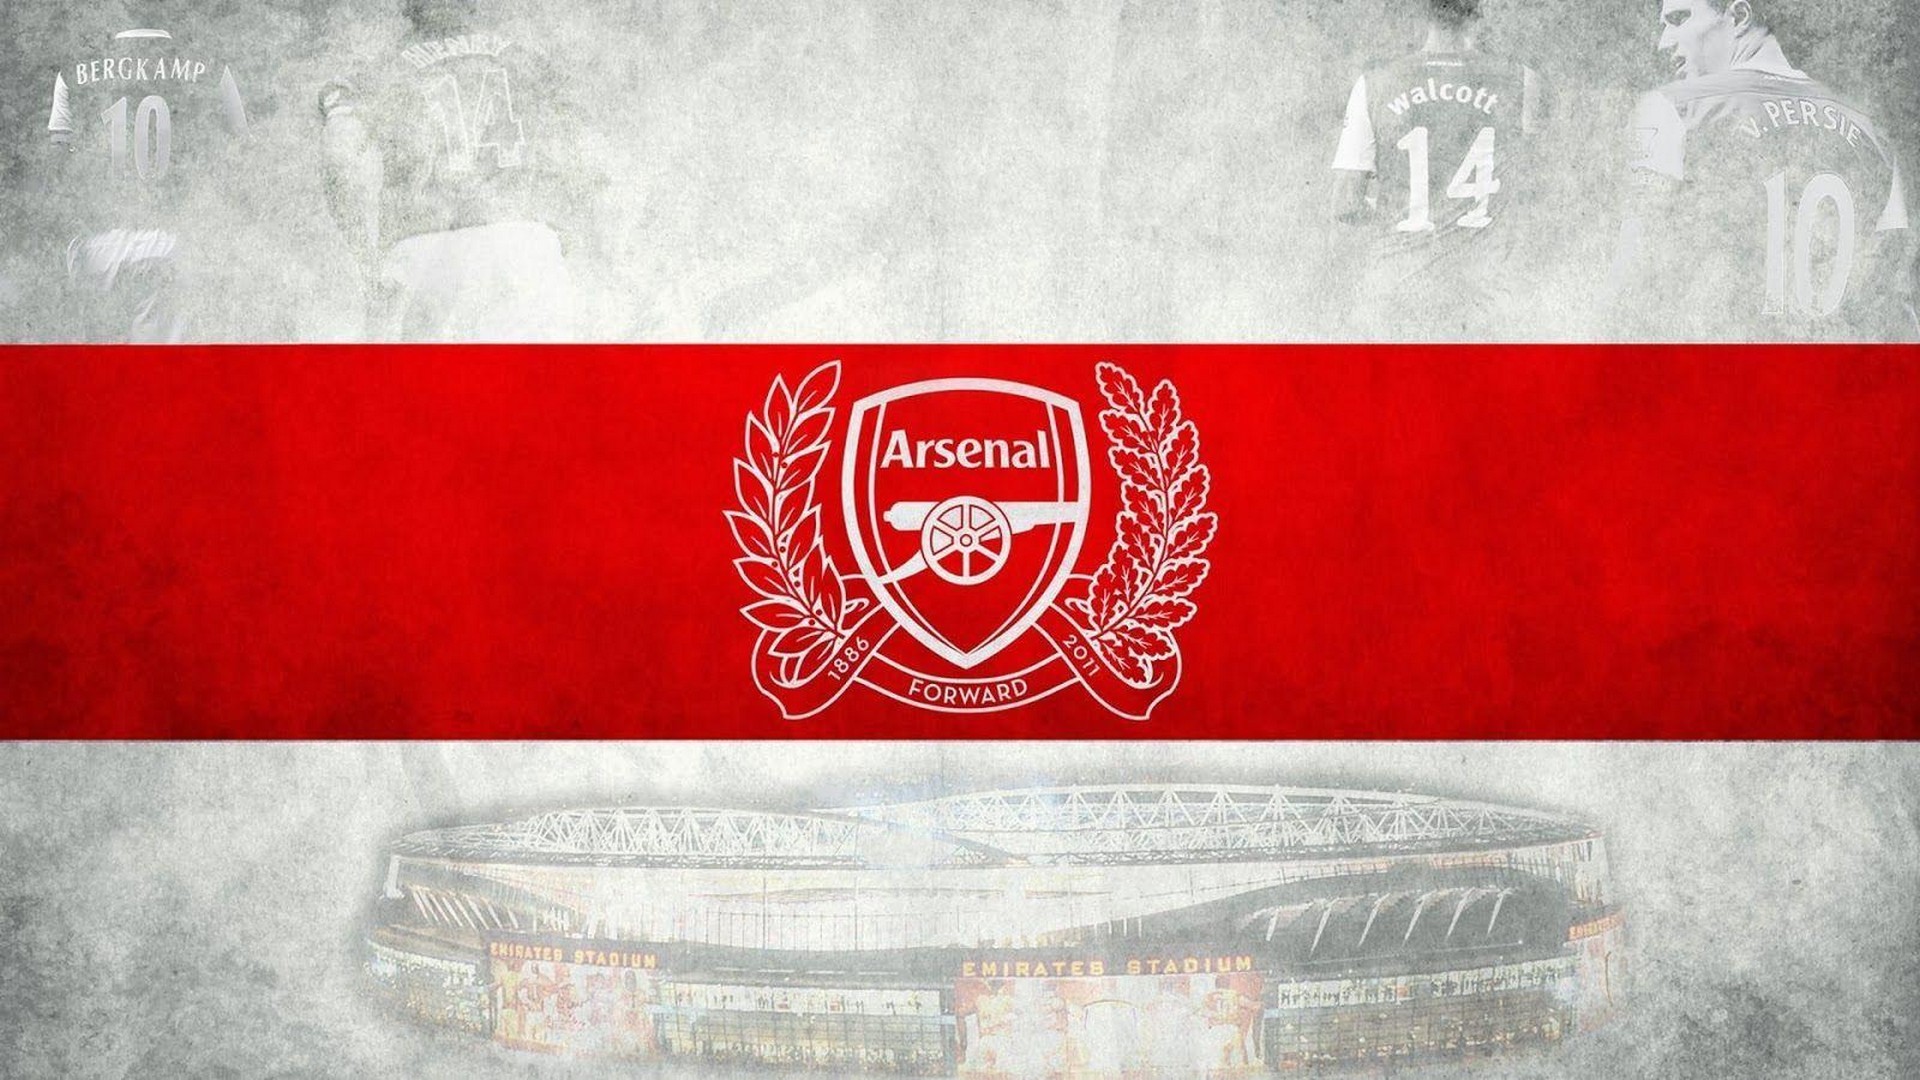 Wallpapers HD Arsenal Football Club With Resolution 1920X1080 pixel. You can make this wallpaper for your Mac or Windows Desktop Background, iPhone, Android or Tablet and another Smartphone device for free